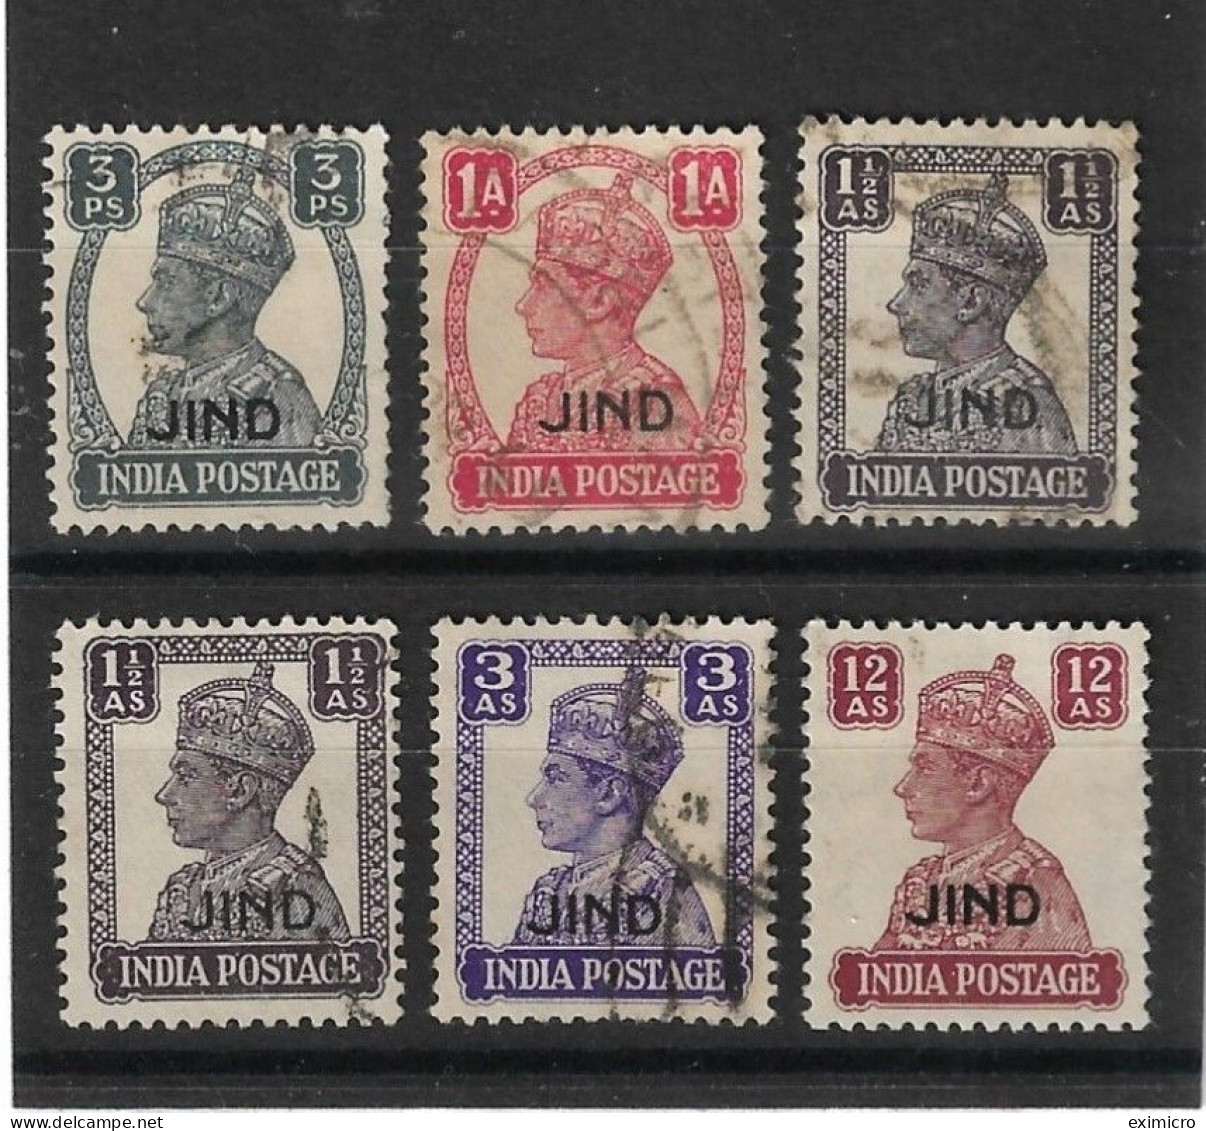 INDIA - JIND 1940 - 1943 3p,1a,1½a Litho, 1½a Typo, 3a Litho, 12a SG 137,140, 142, 142a, 144, 149 FINE USED Cat £54 - Jhind